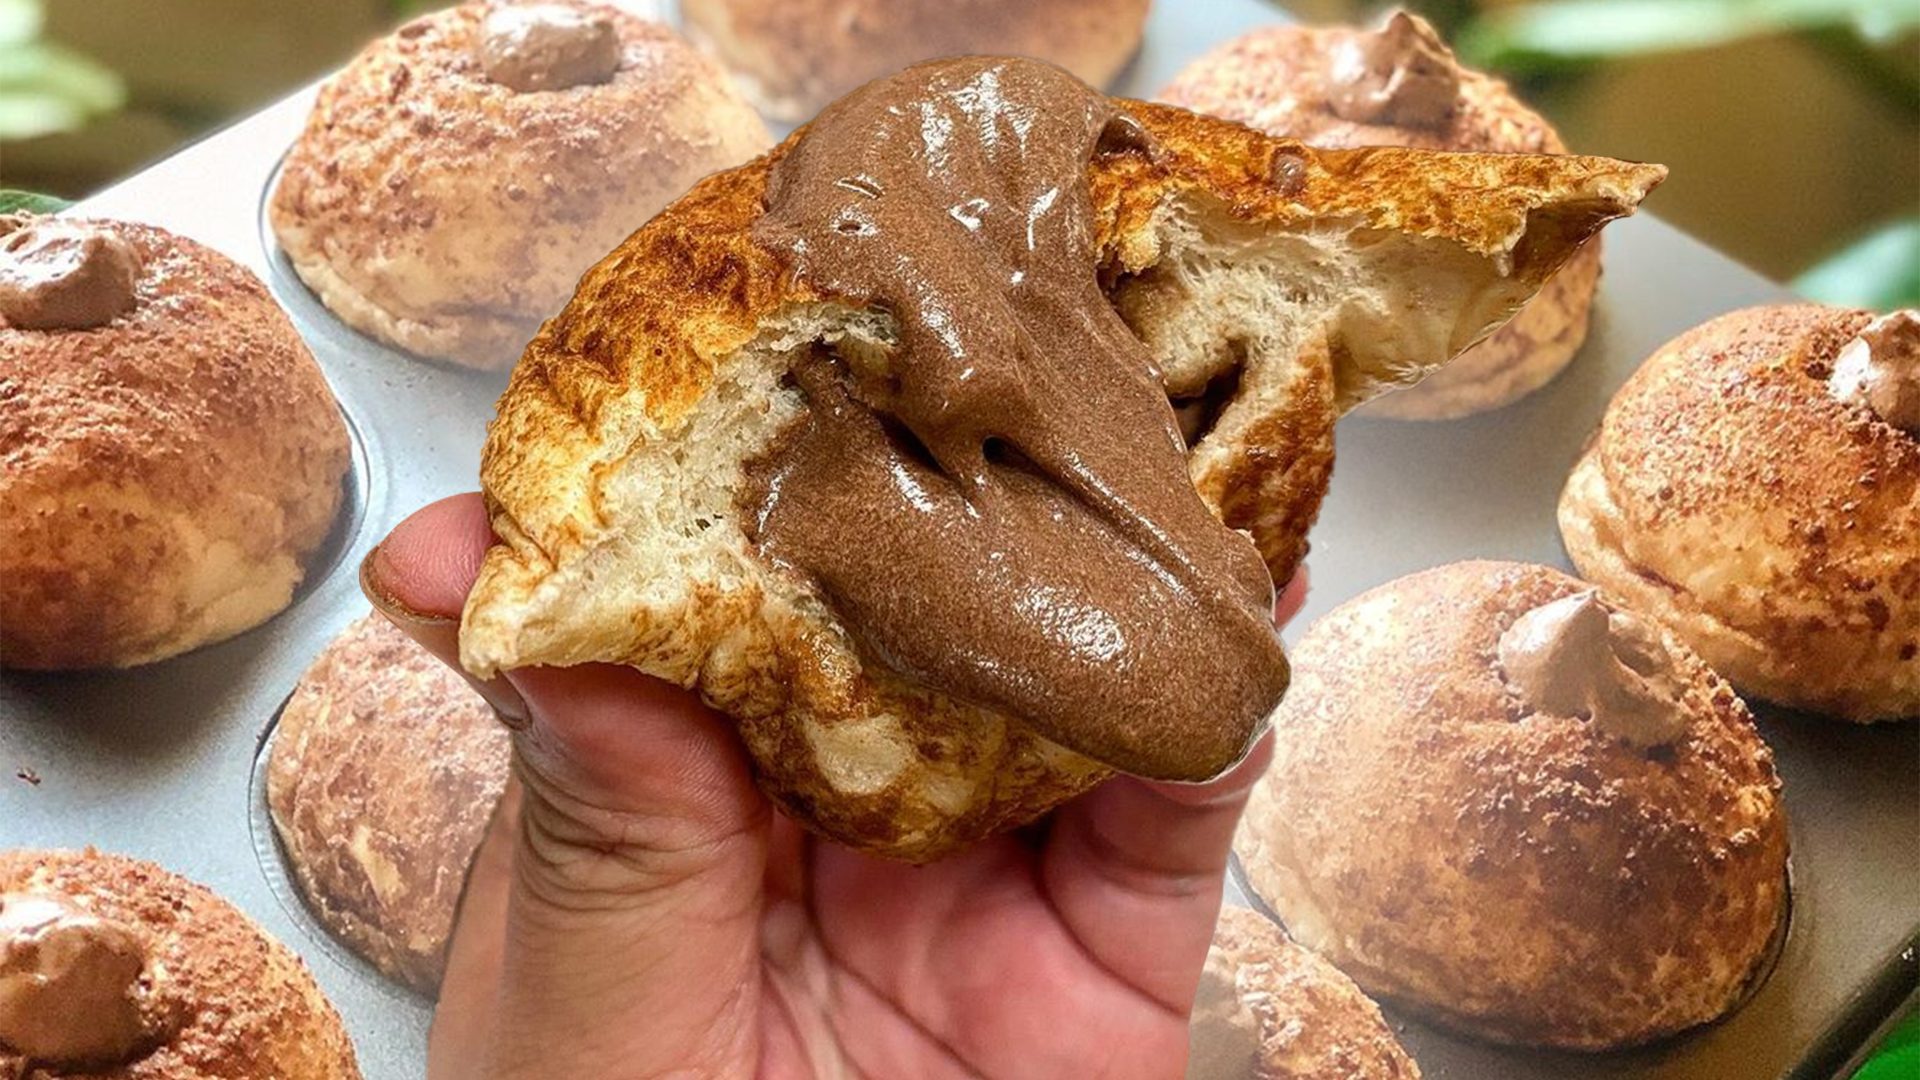 Get Milo-stuffed pandesal from this local panaderia